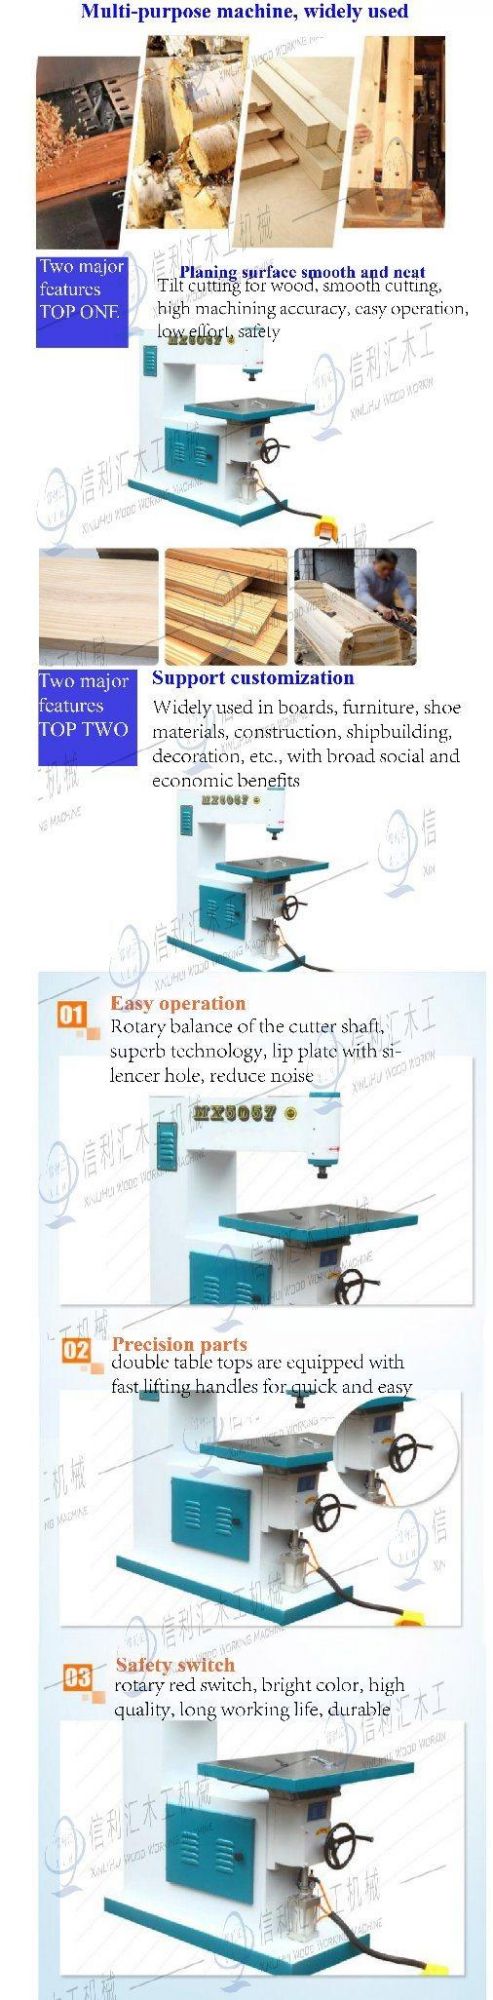 Mx5068 Woodworking High Speed Spindle Moulder Wood Shaper Machine/ High Speed Router Profile Copy Router Machine/ CNC Router Machine Mini Desktop CNC Router